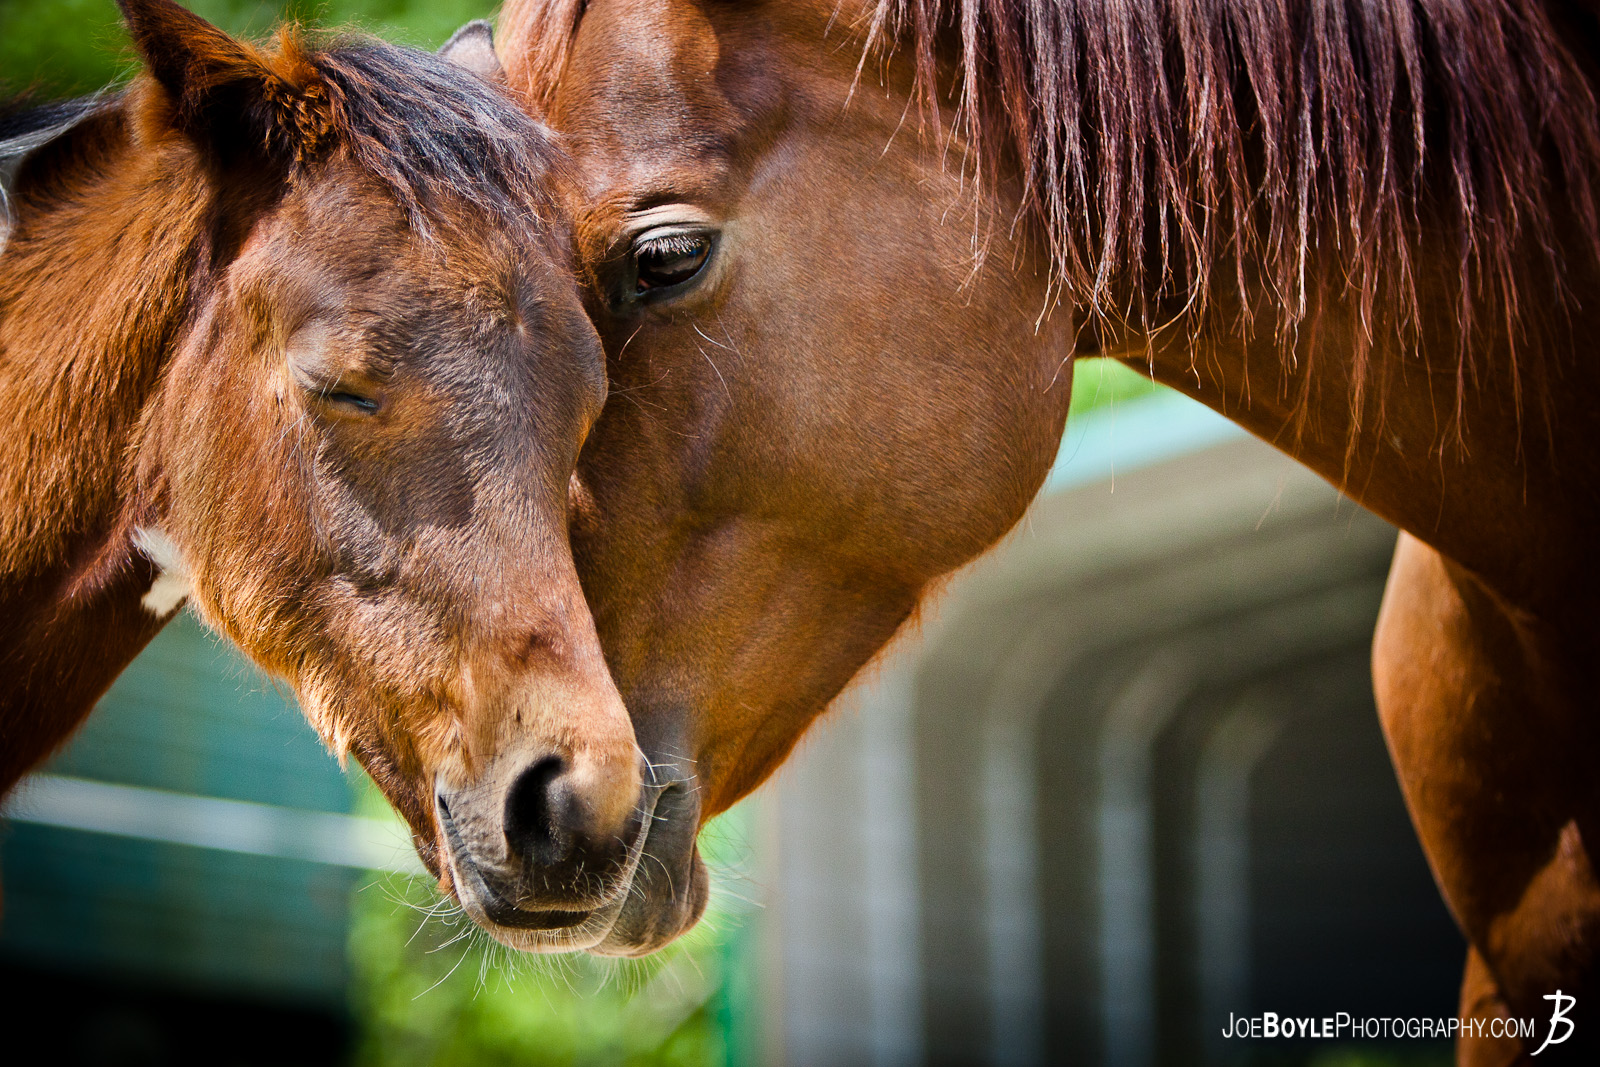  This photo won awards for being one of the top photos during the entire month of May on Pixoto.com! While at "Neigh Day" presented by Diamonds in the Rough Horses (Equine) Rescue Shelter, I was walking through the horse pastures and I was able to capture this photo of the colt, "Cheveyo" with his momma, "Breezie." 